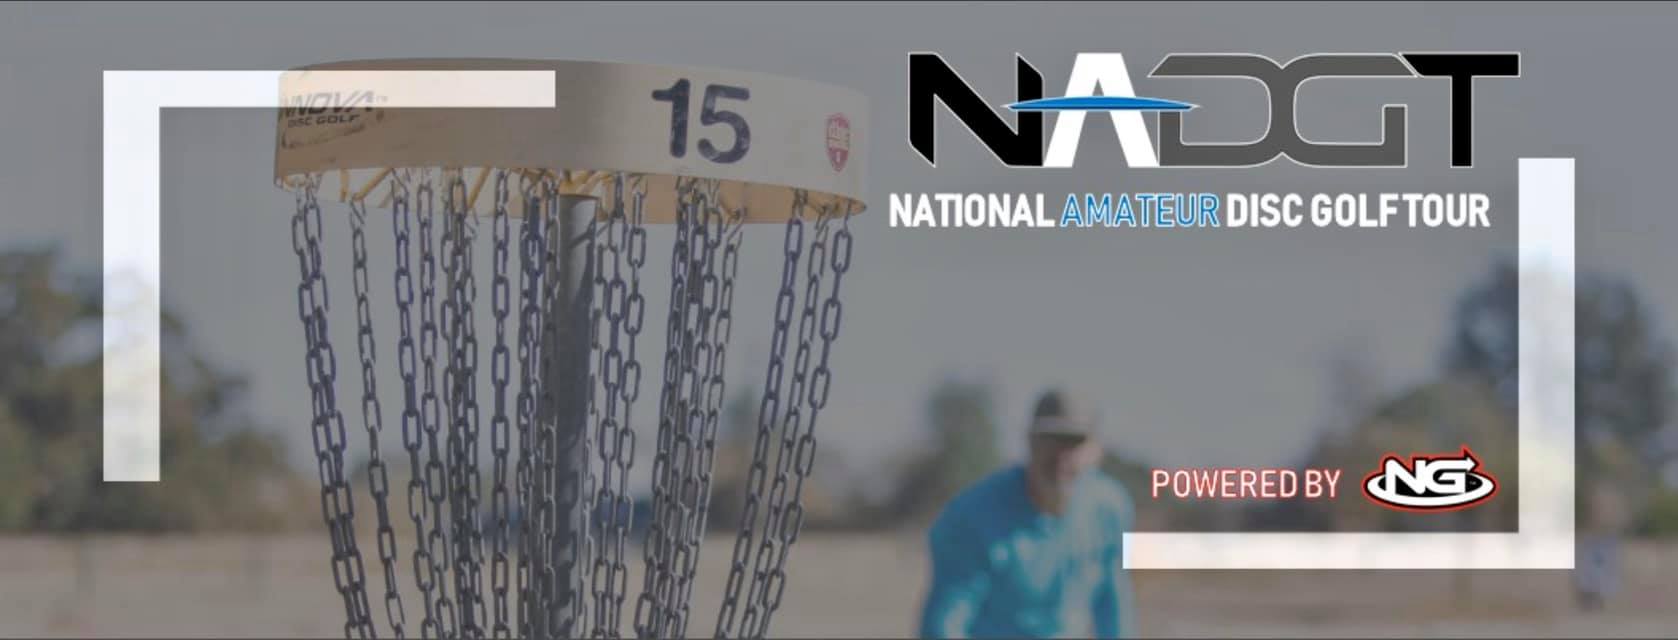 BNB Hosts The National Amateur Disc Golf Tour Powered by NG